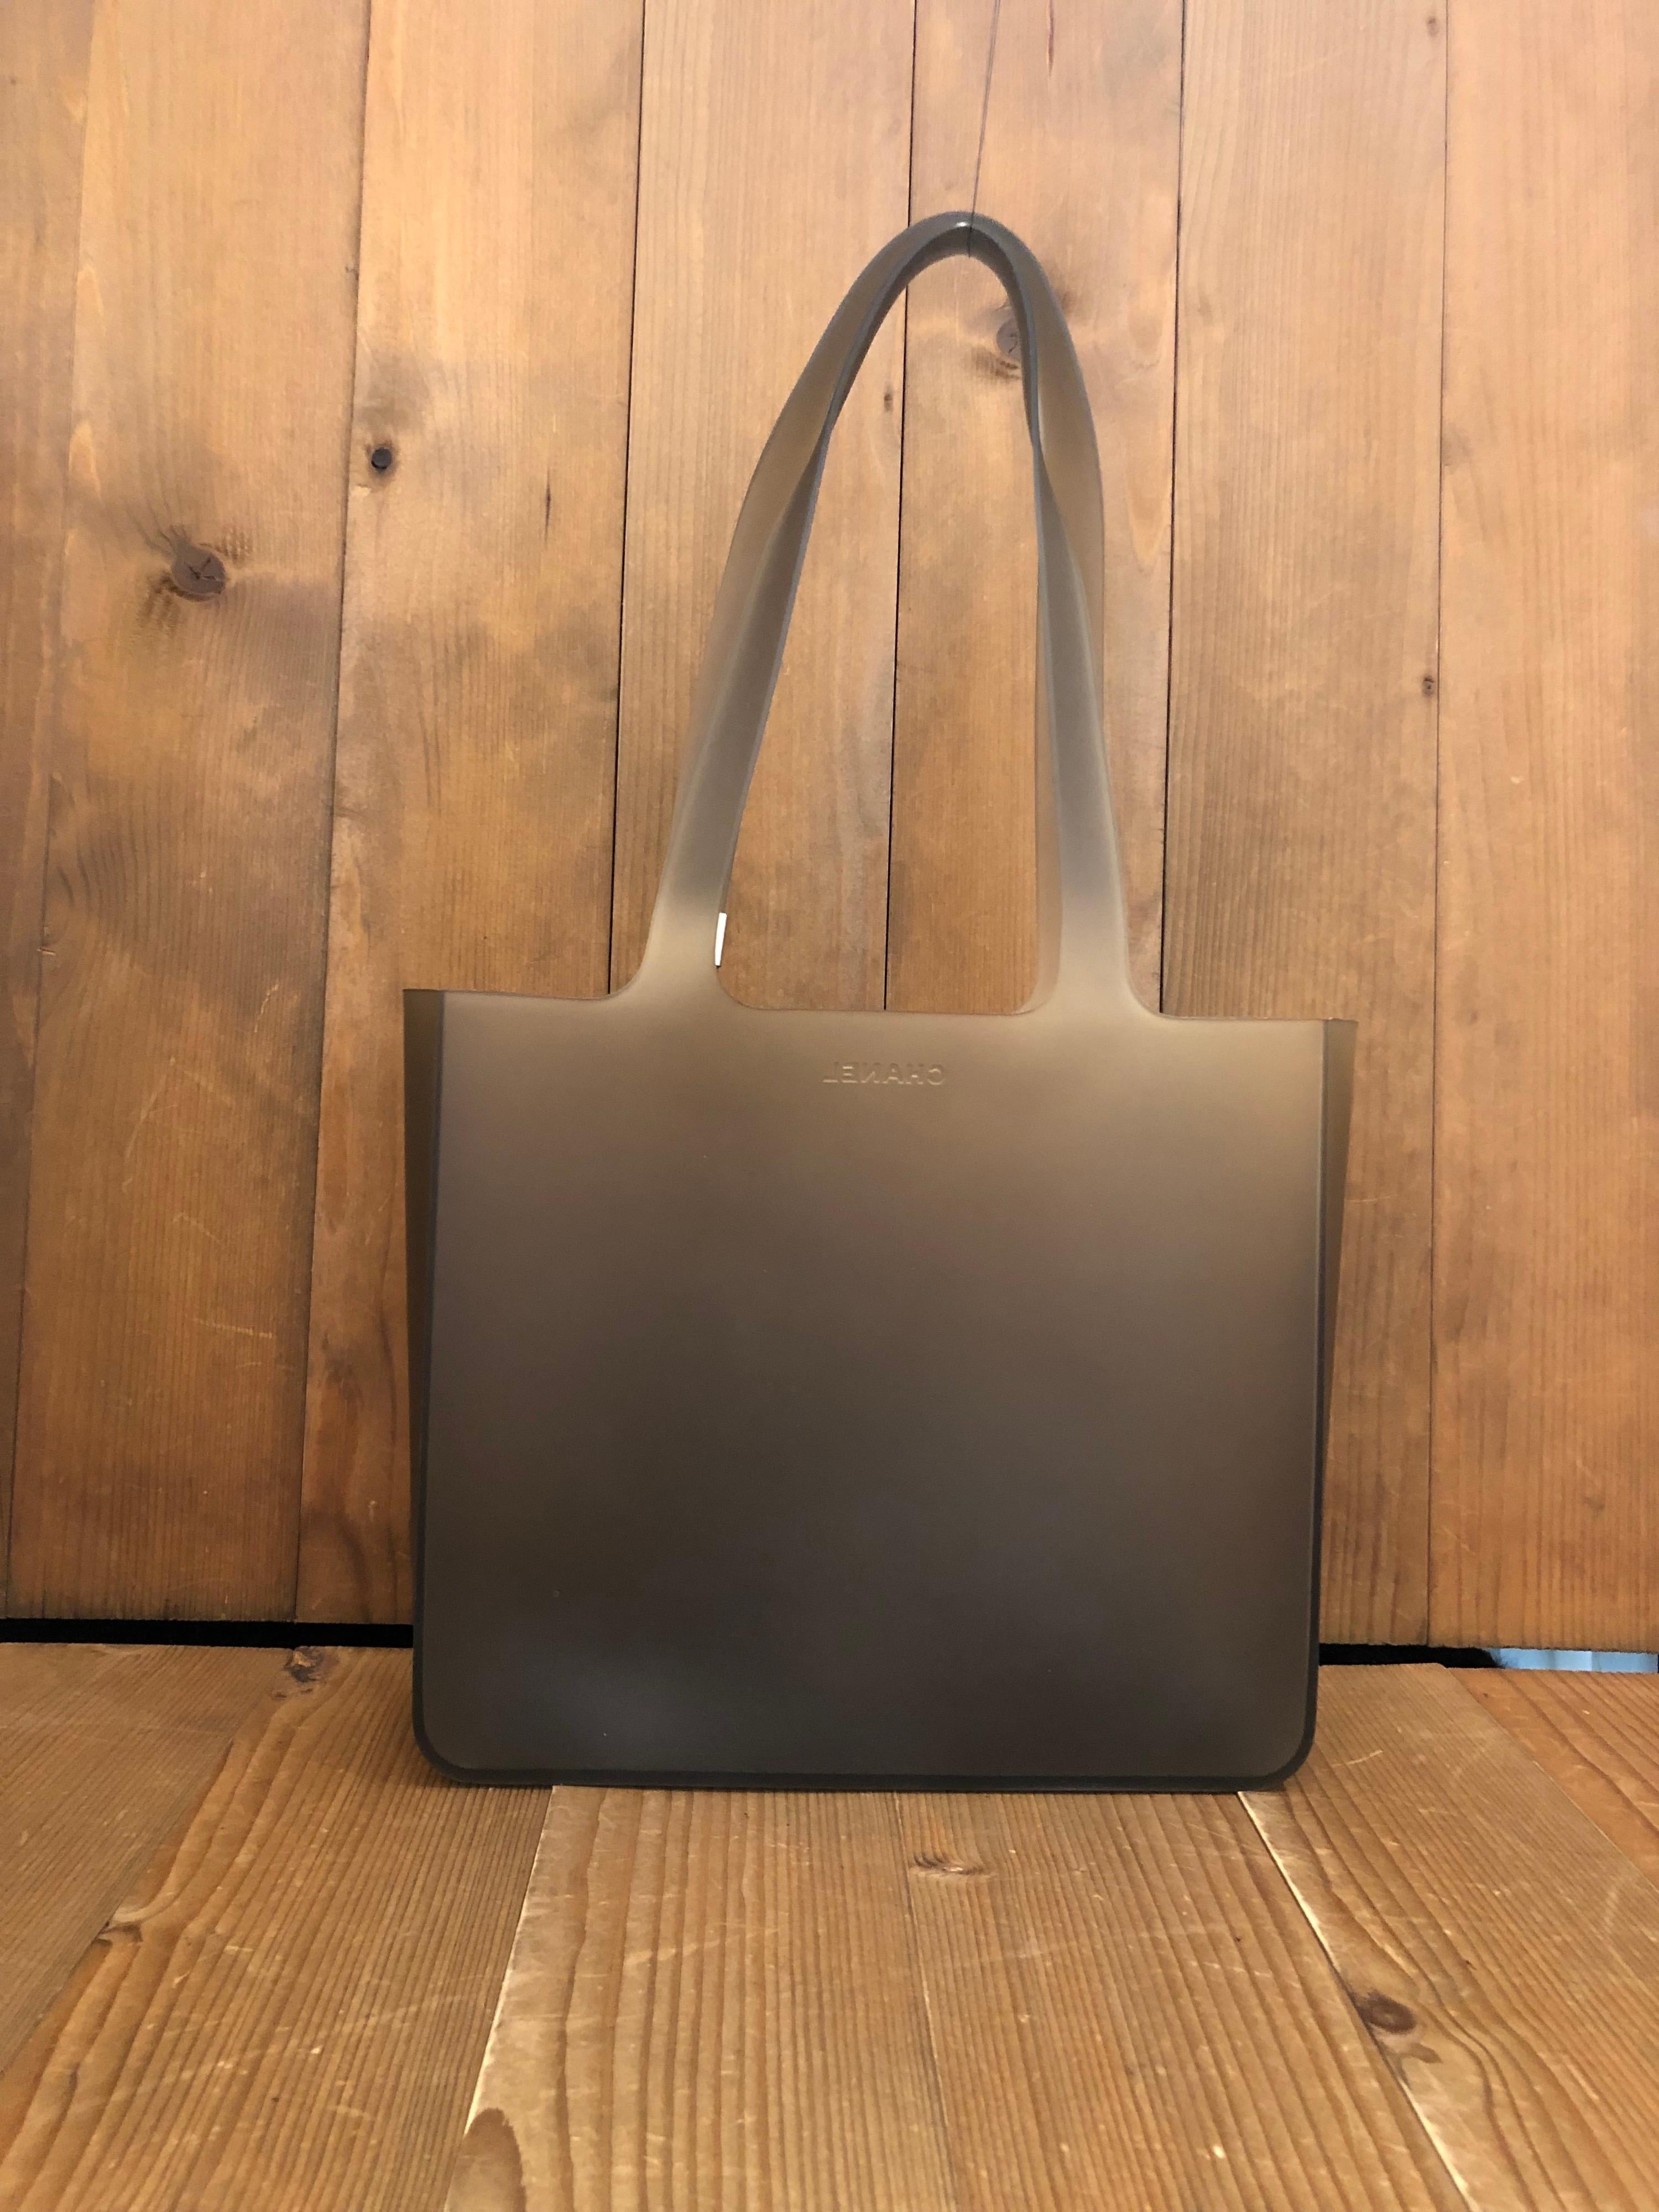 1990s Chanel tote bag in gray translucent silicone. Measures 9.5 x 8.5 x 3 inches Handle Drop 9.5 inches. 

Condition - Some signs of wear consistent with age and normal use 

